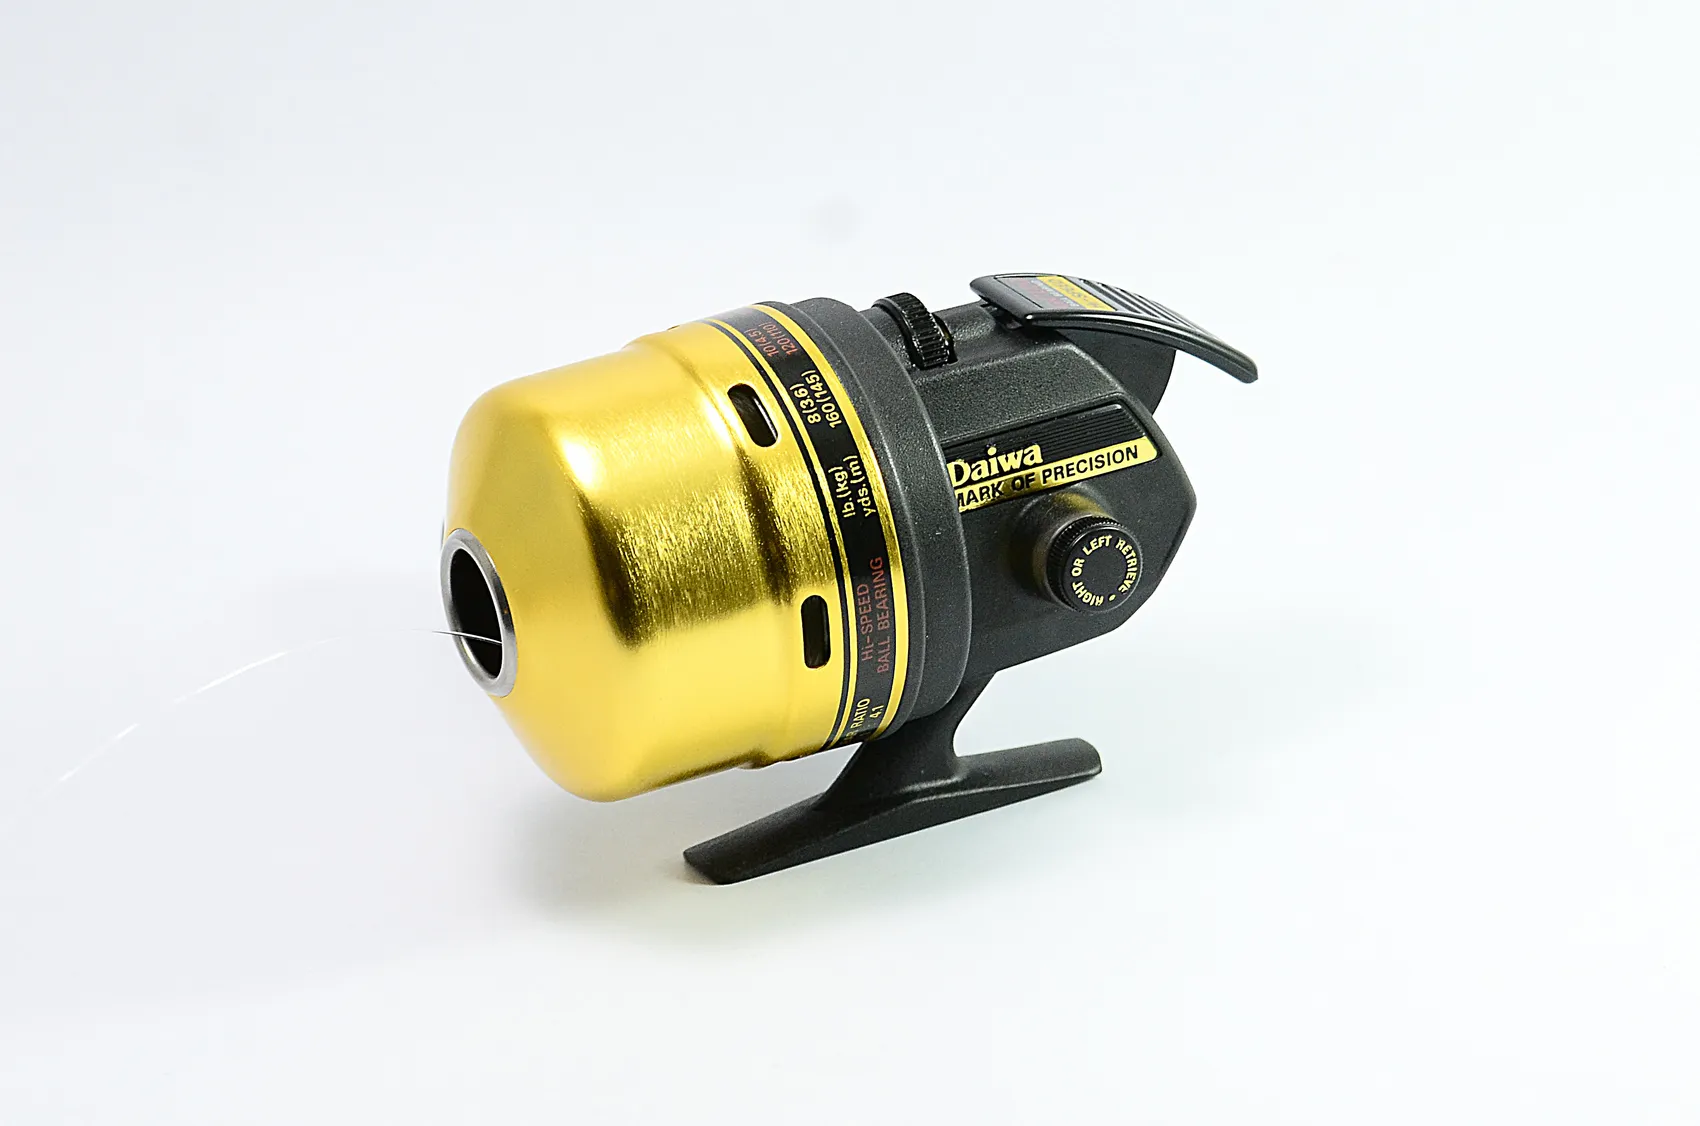 daiwa goldcast gc120 Today's Deals - OFF 70%